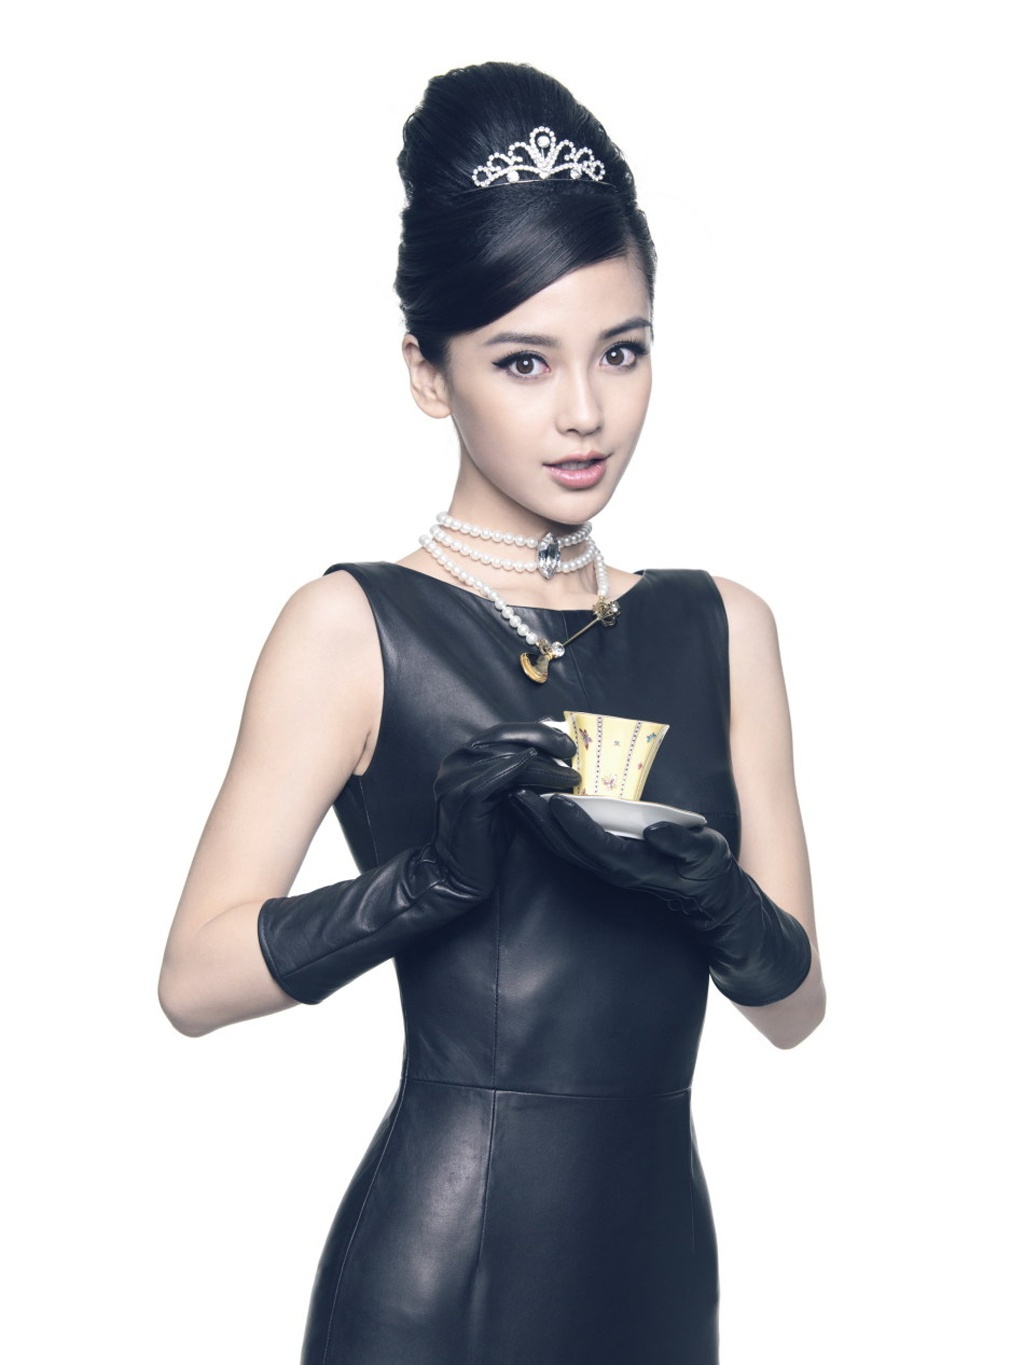 Angelababy For Smartphone